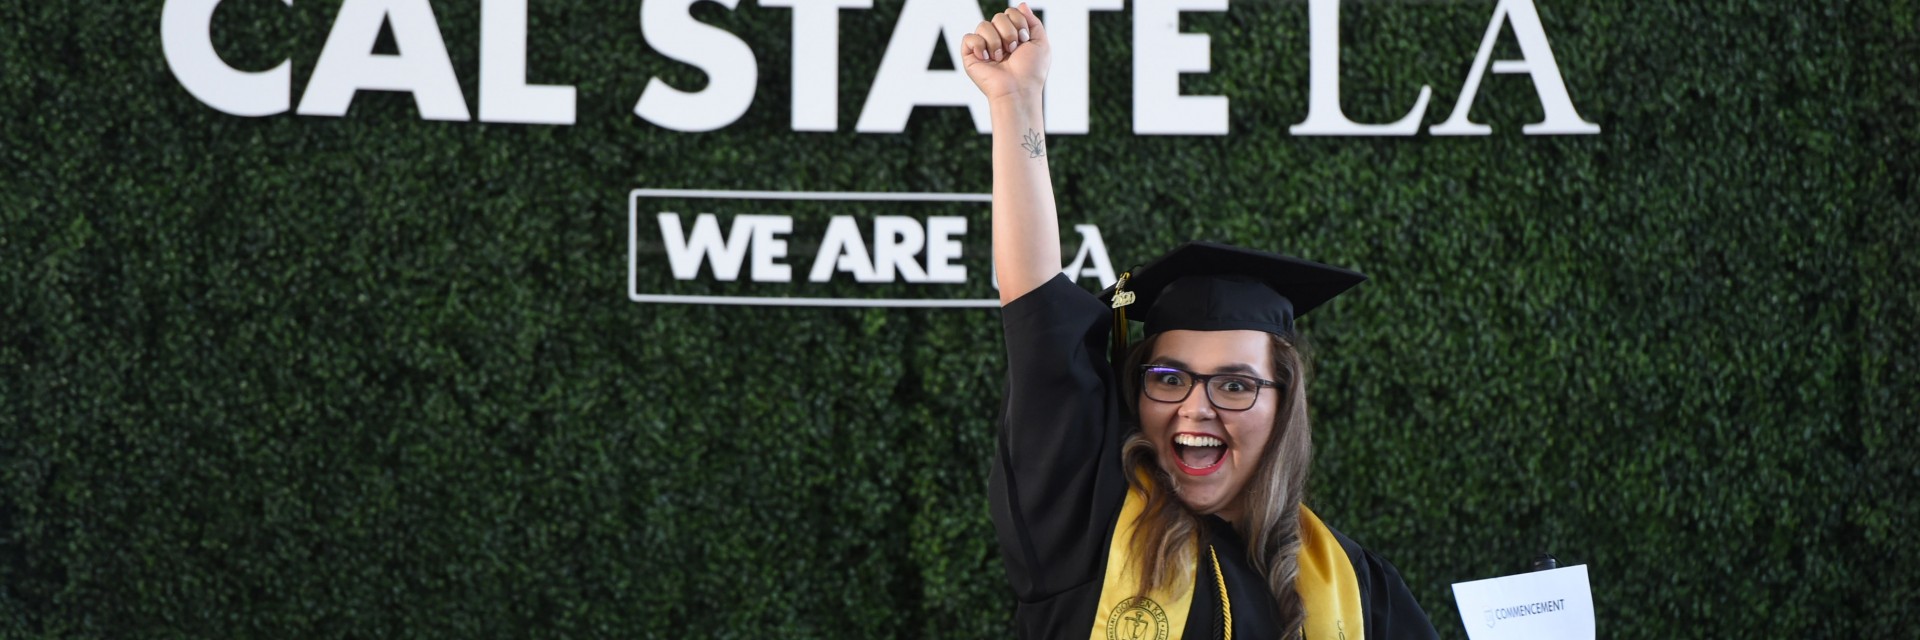 A woman in cap and gown smiles with her hand up